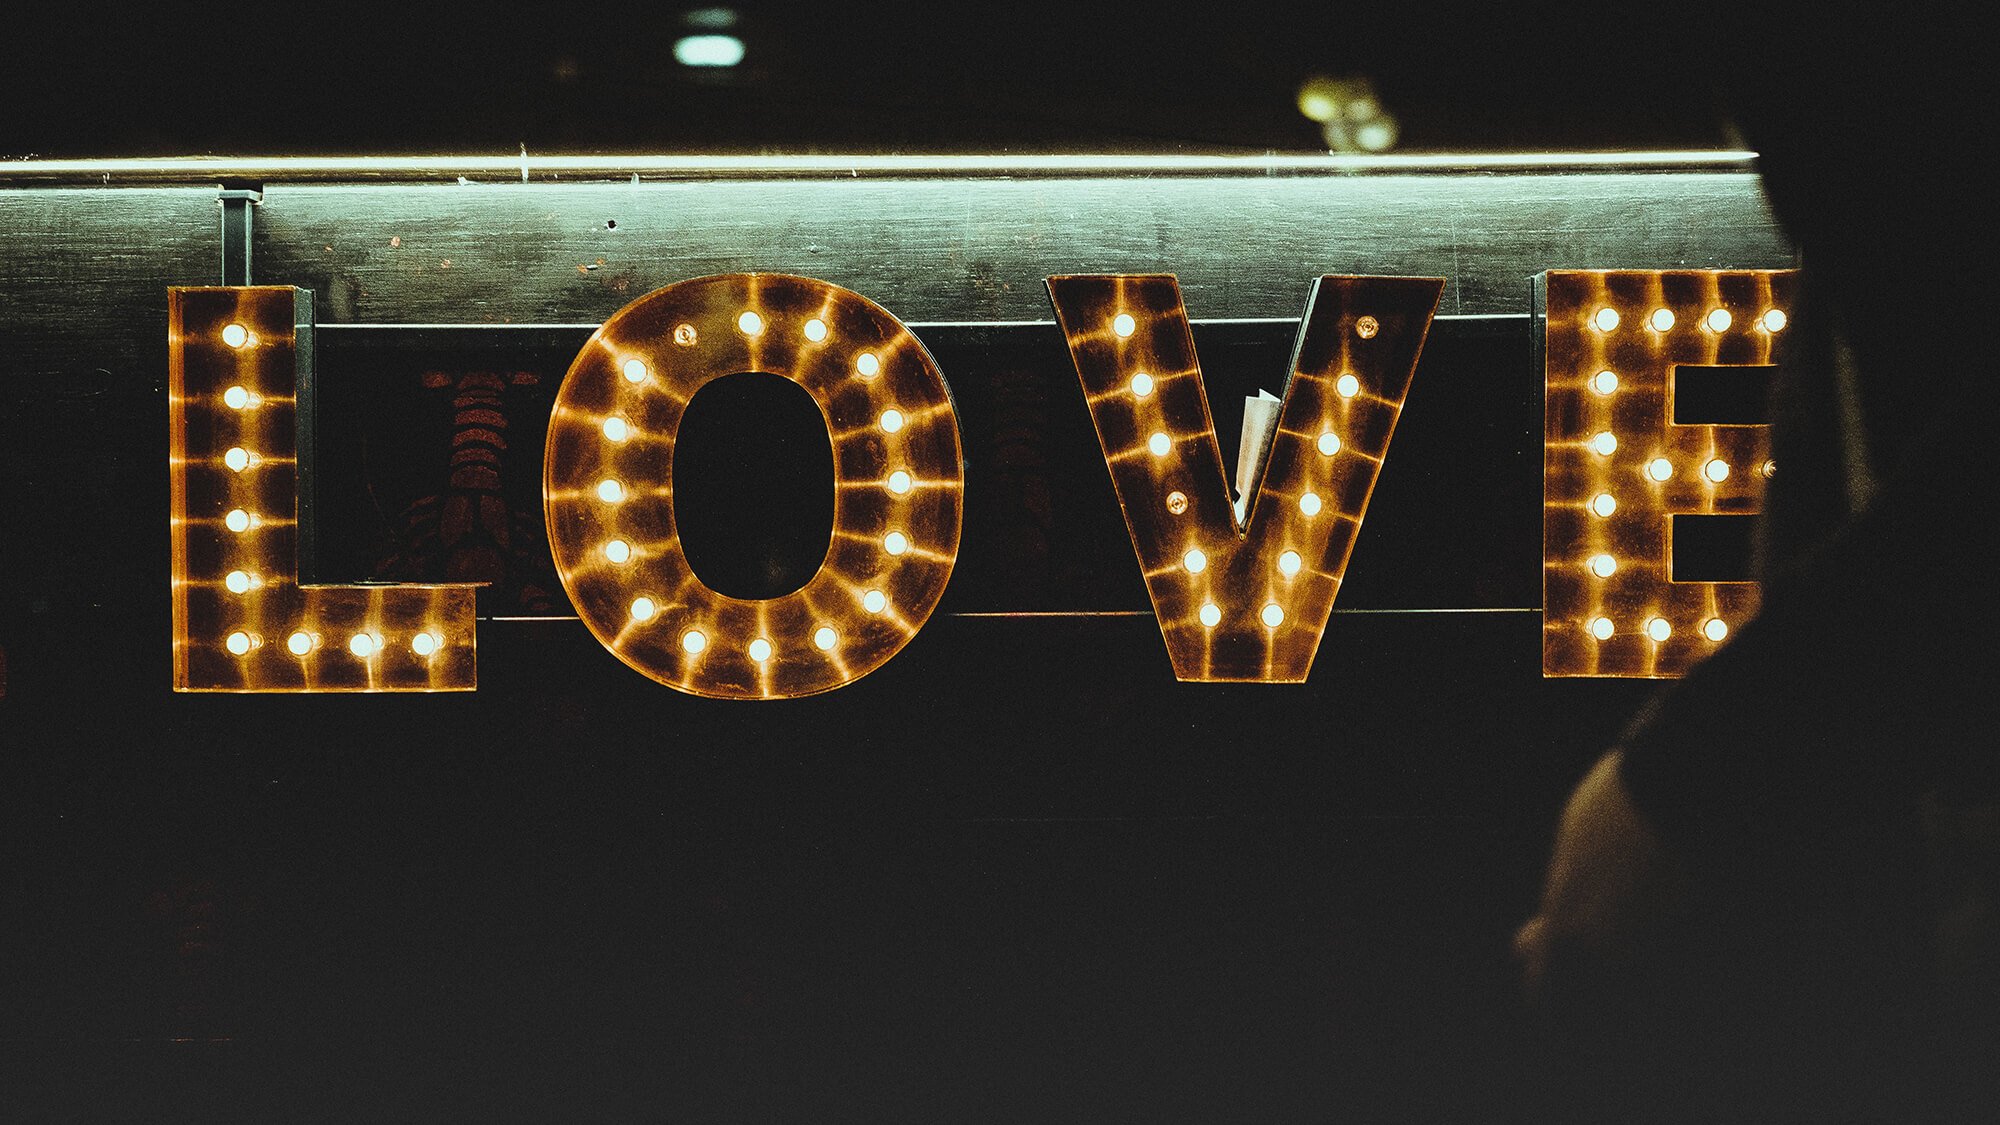 demonstrated interest shows love - clem-onojeghuo-400043-unsplash